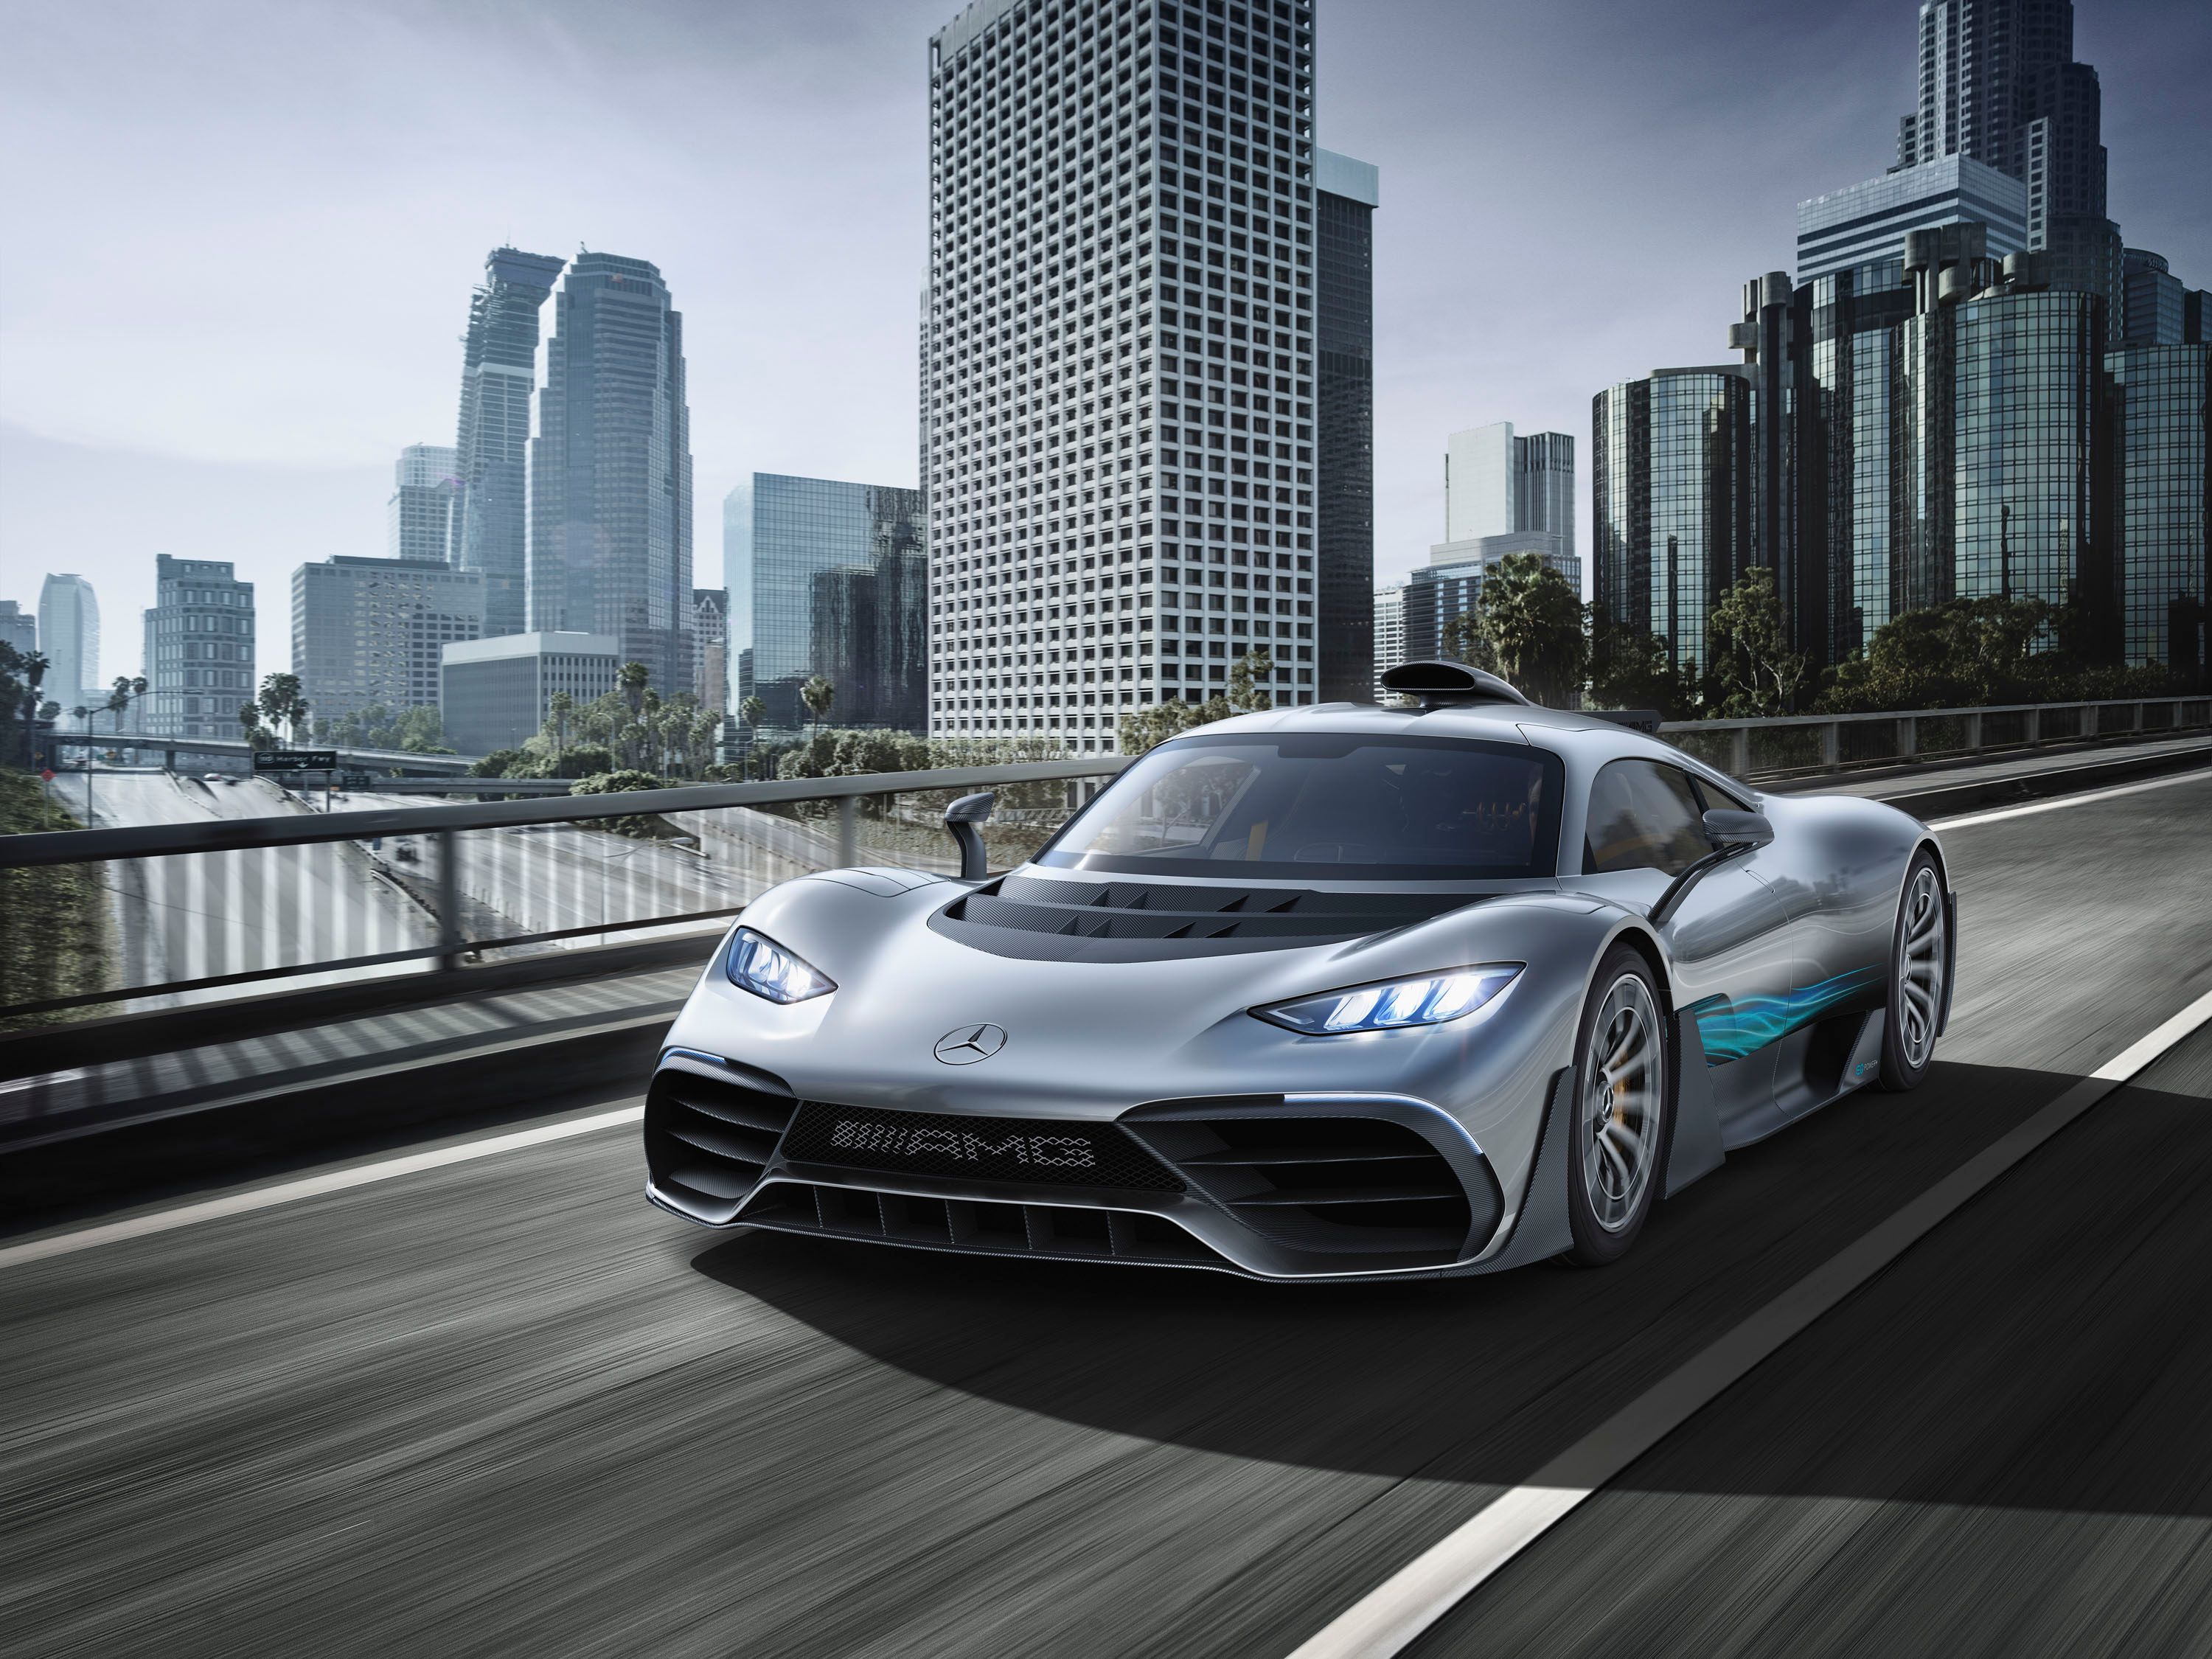 2020 Why Does the AMG One Hypercar Sound Like a Spaceship?